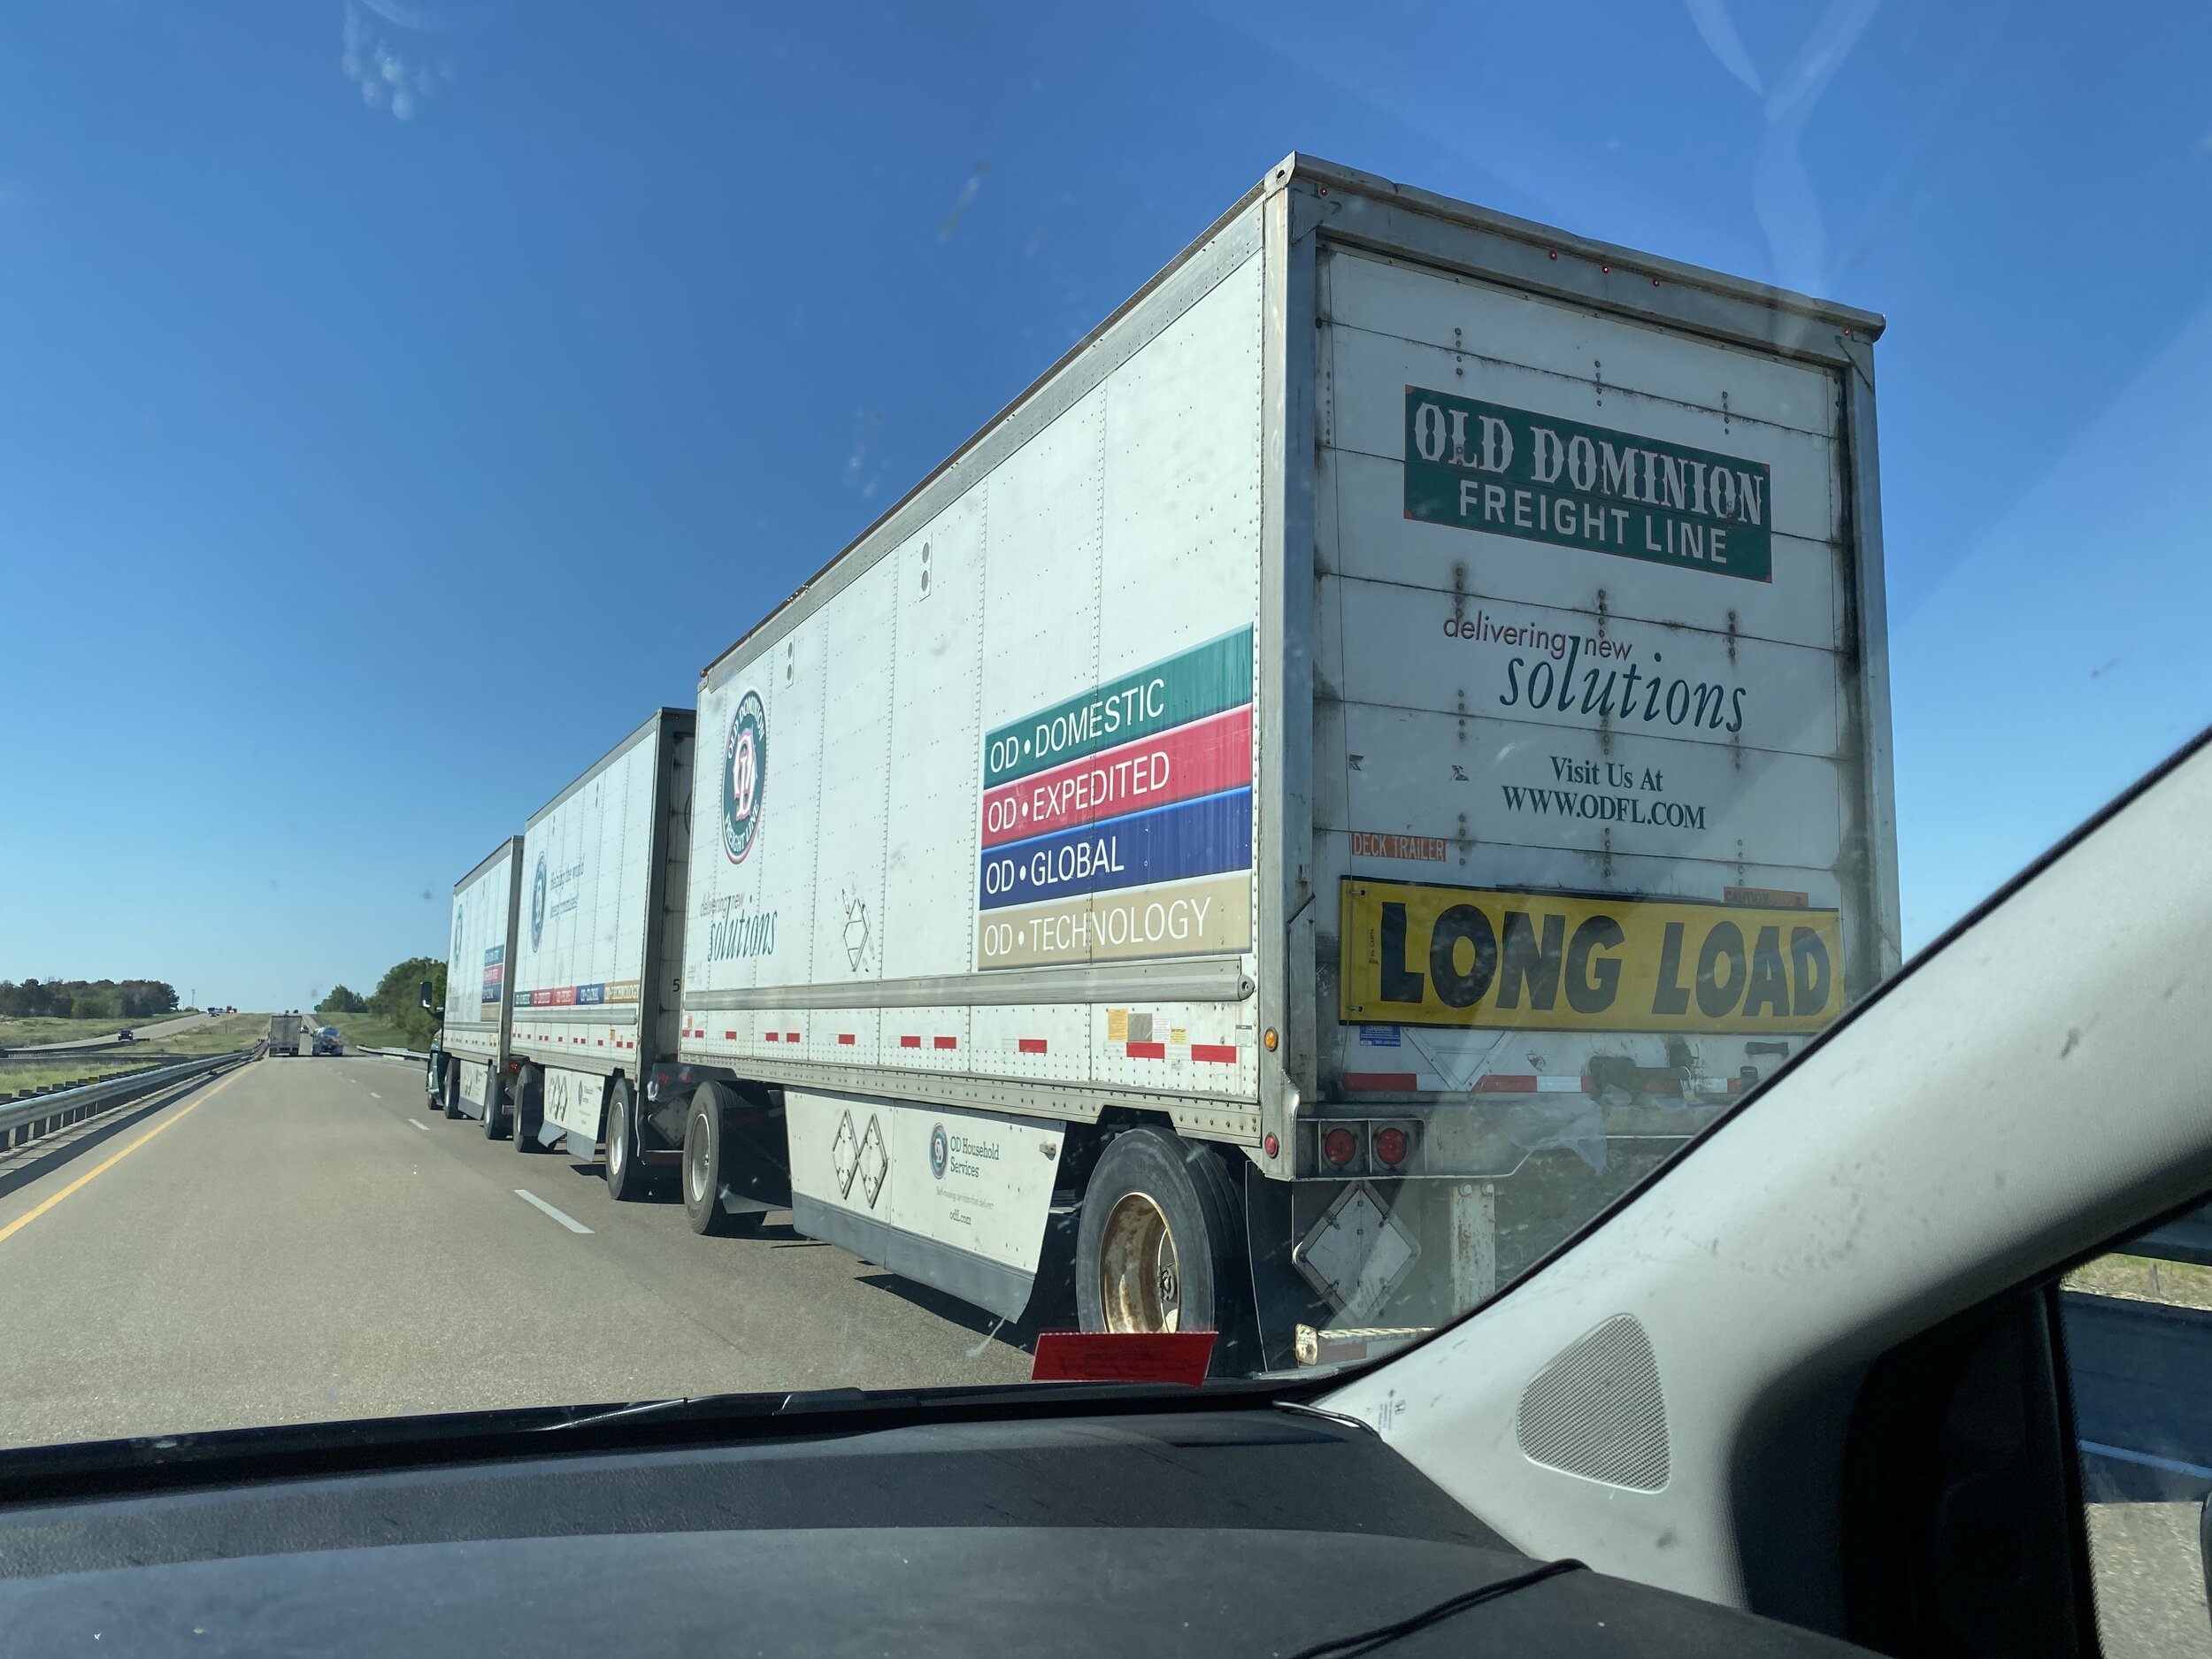 We were impressed by a number of these triple-load trucks.  Photo by Karen Boudreaux, June 4, 2021